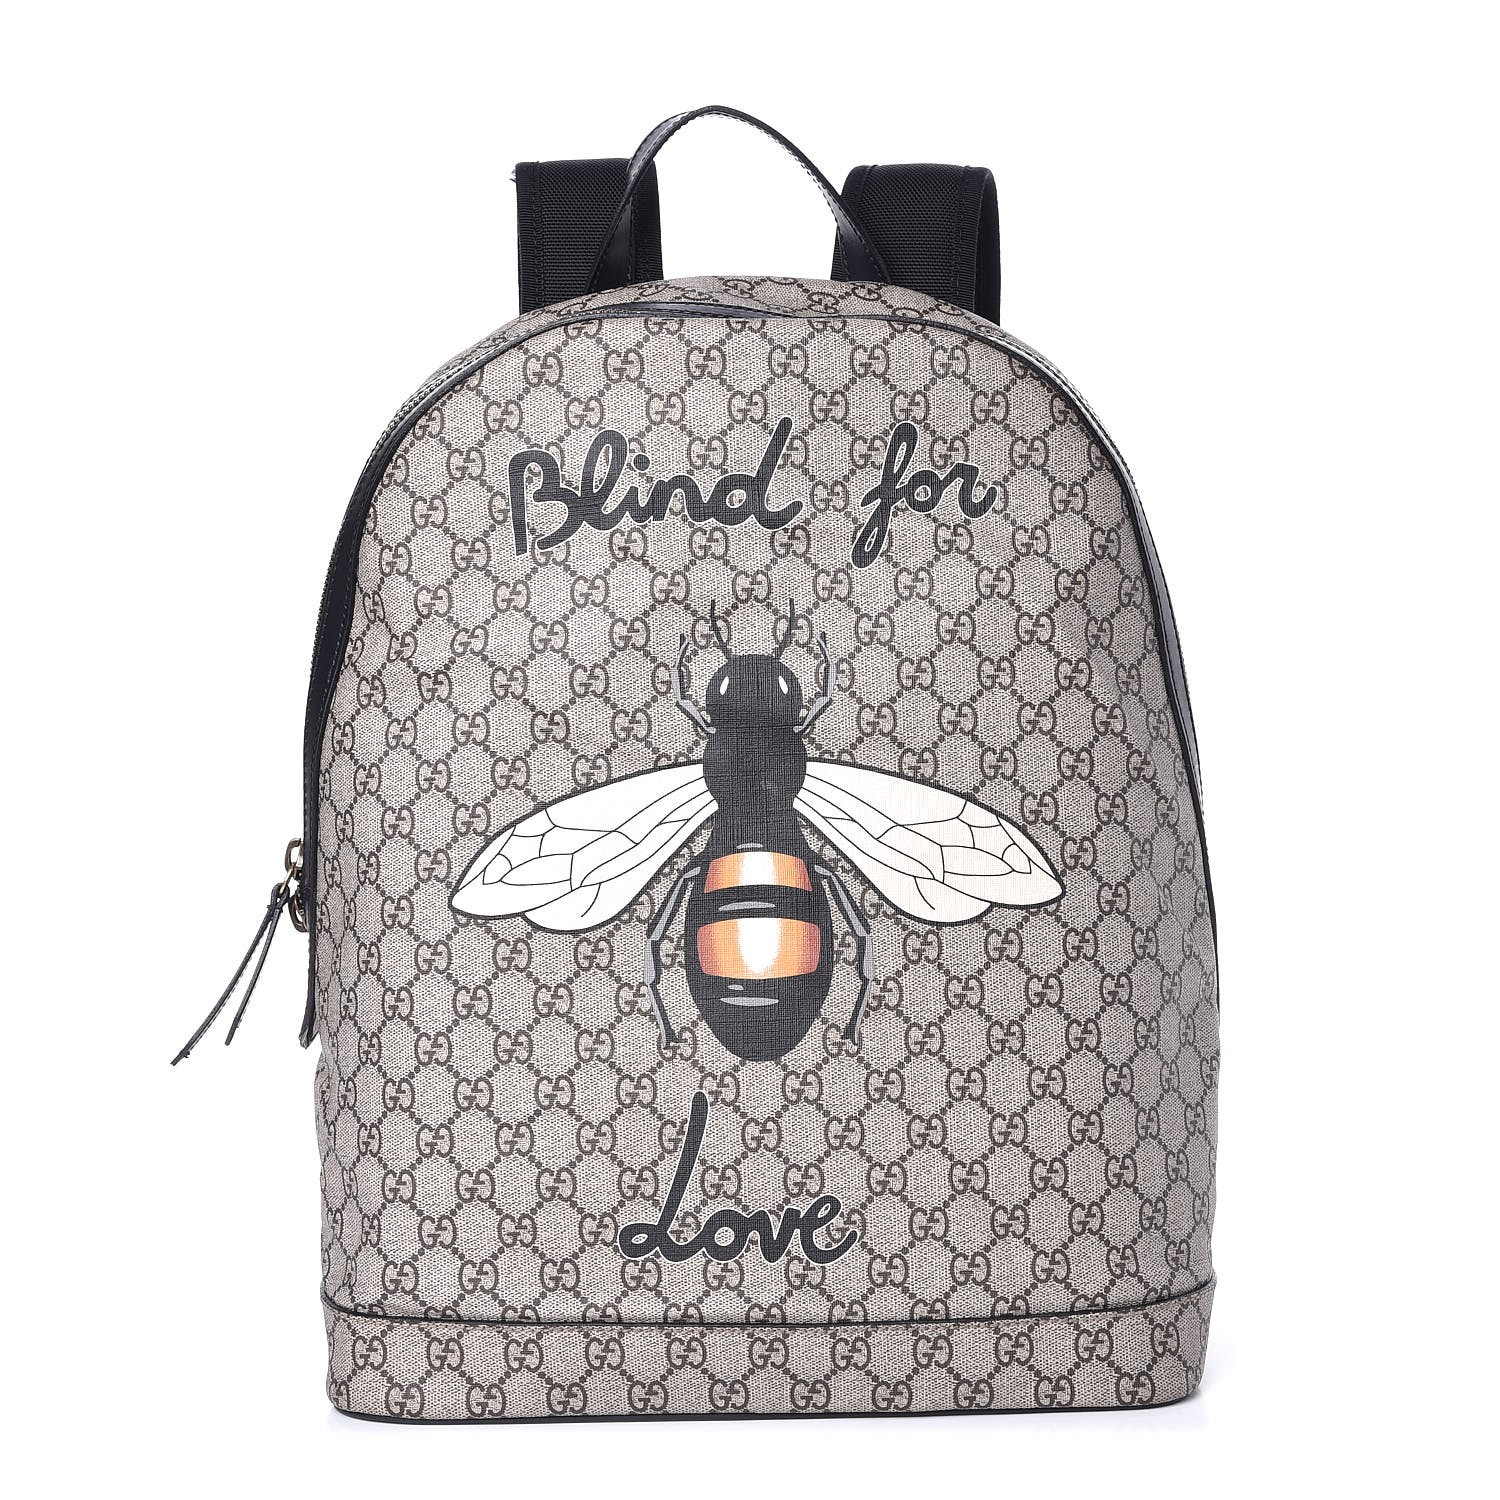 Gucci Bumblebee Backpack Online Sale 